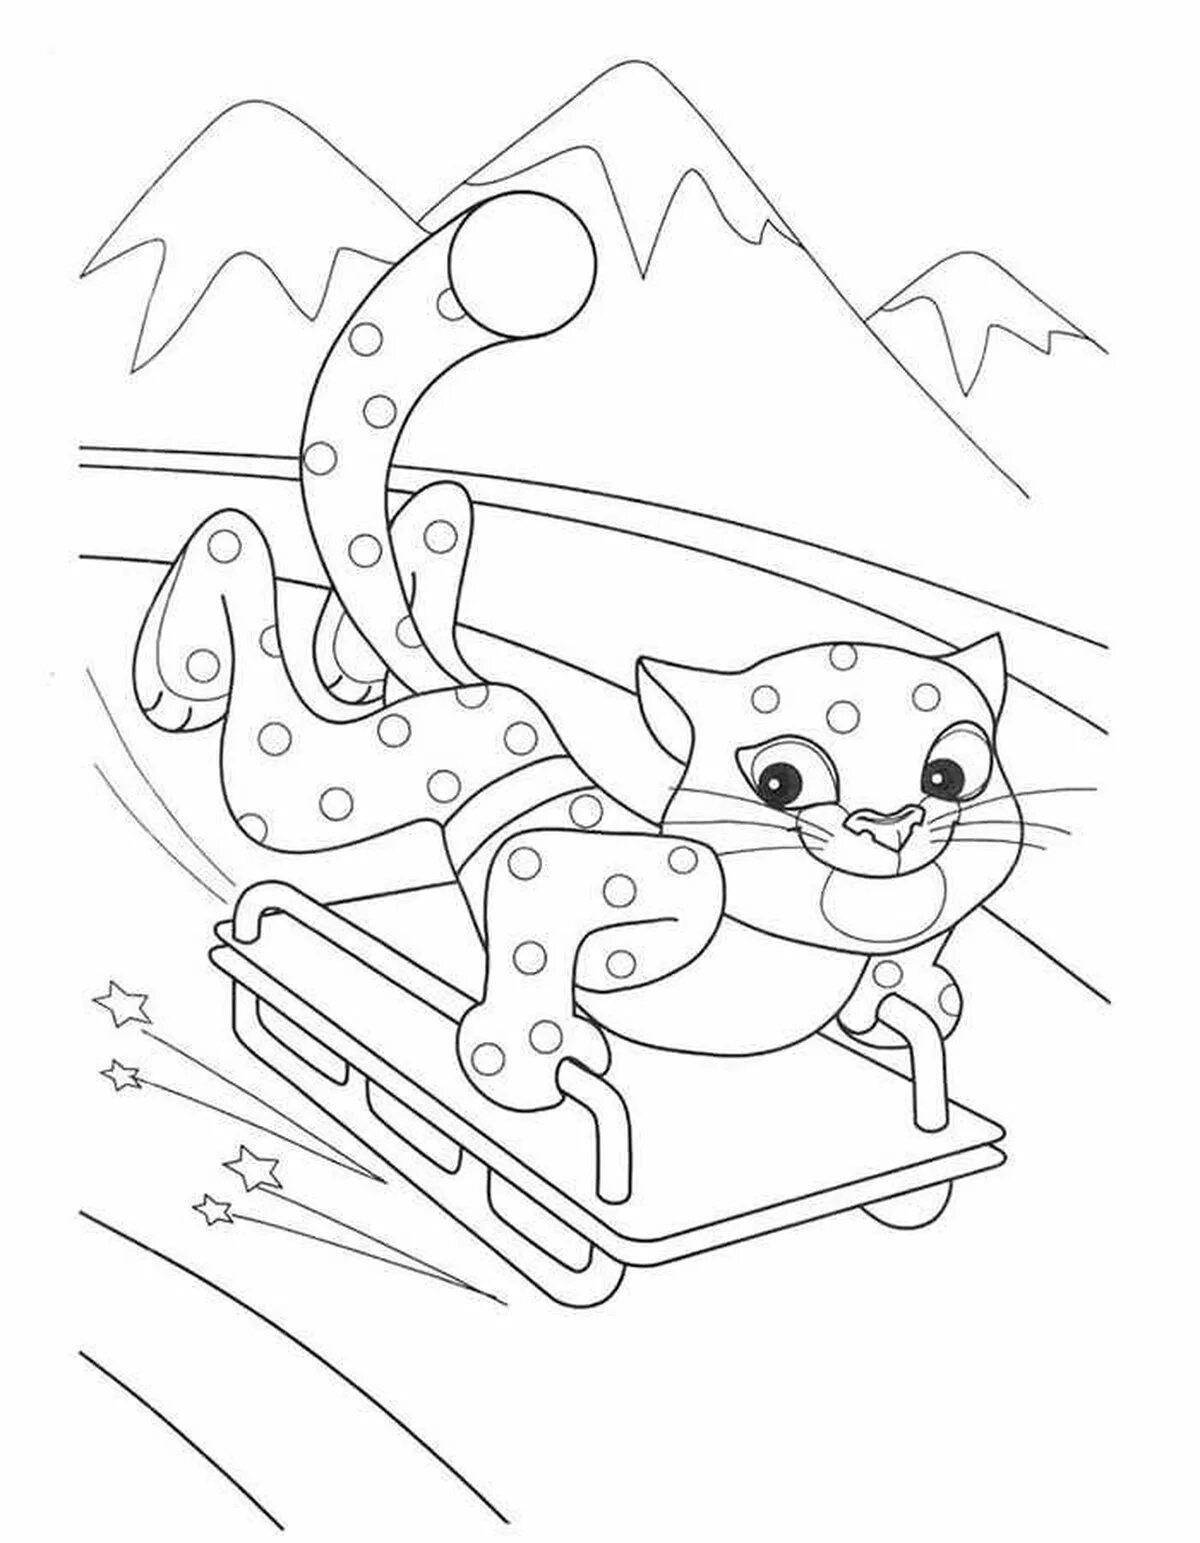 Tempting coloring book for children, olympic sports